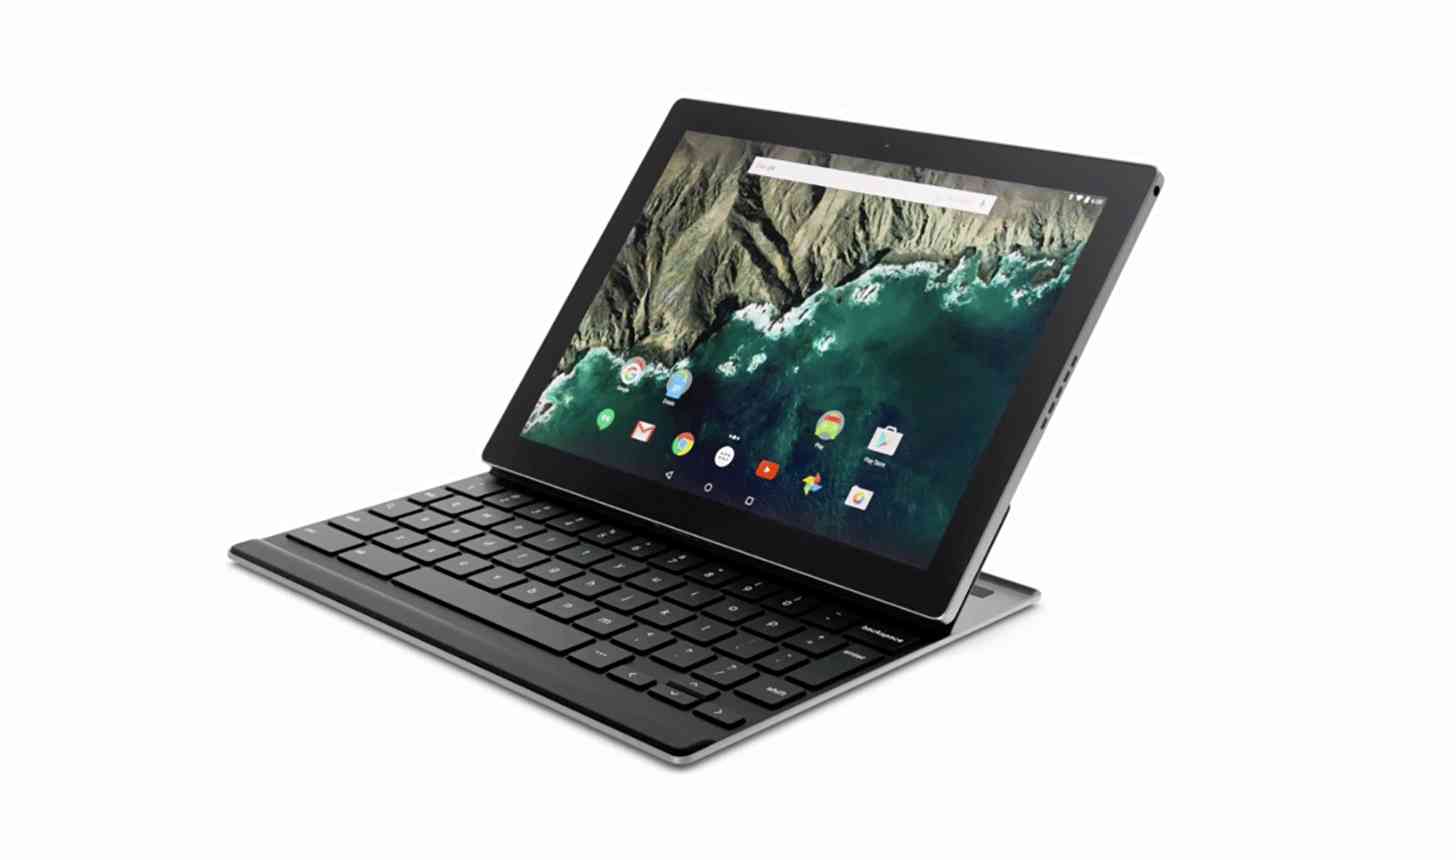 Google Pixel C Android tablet official